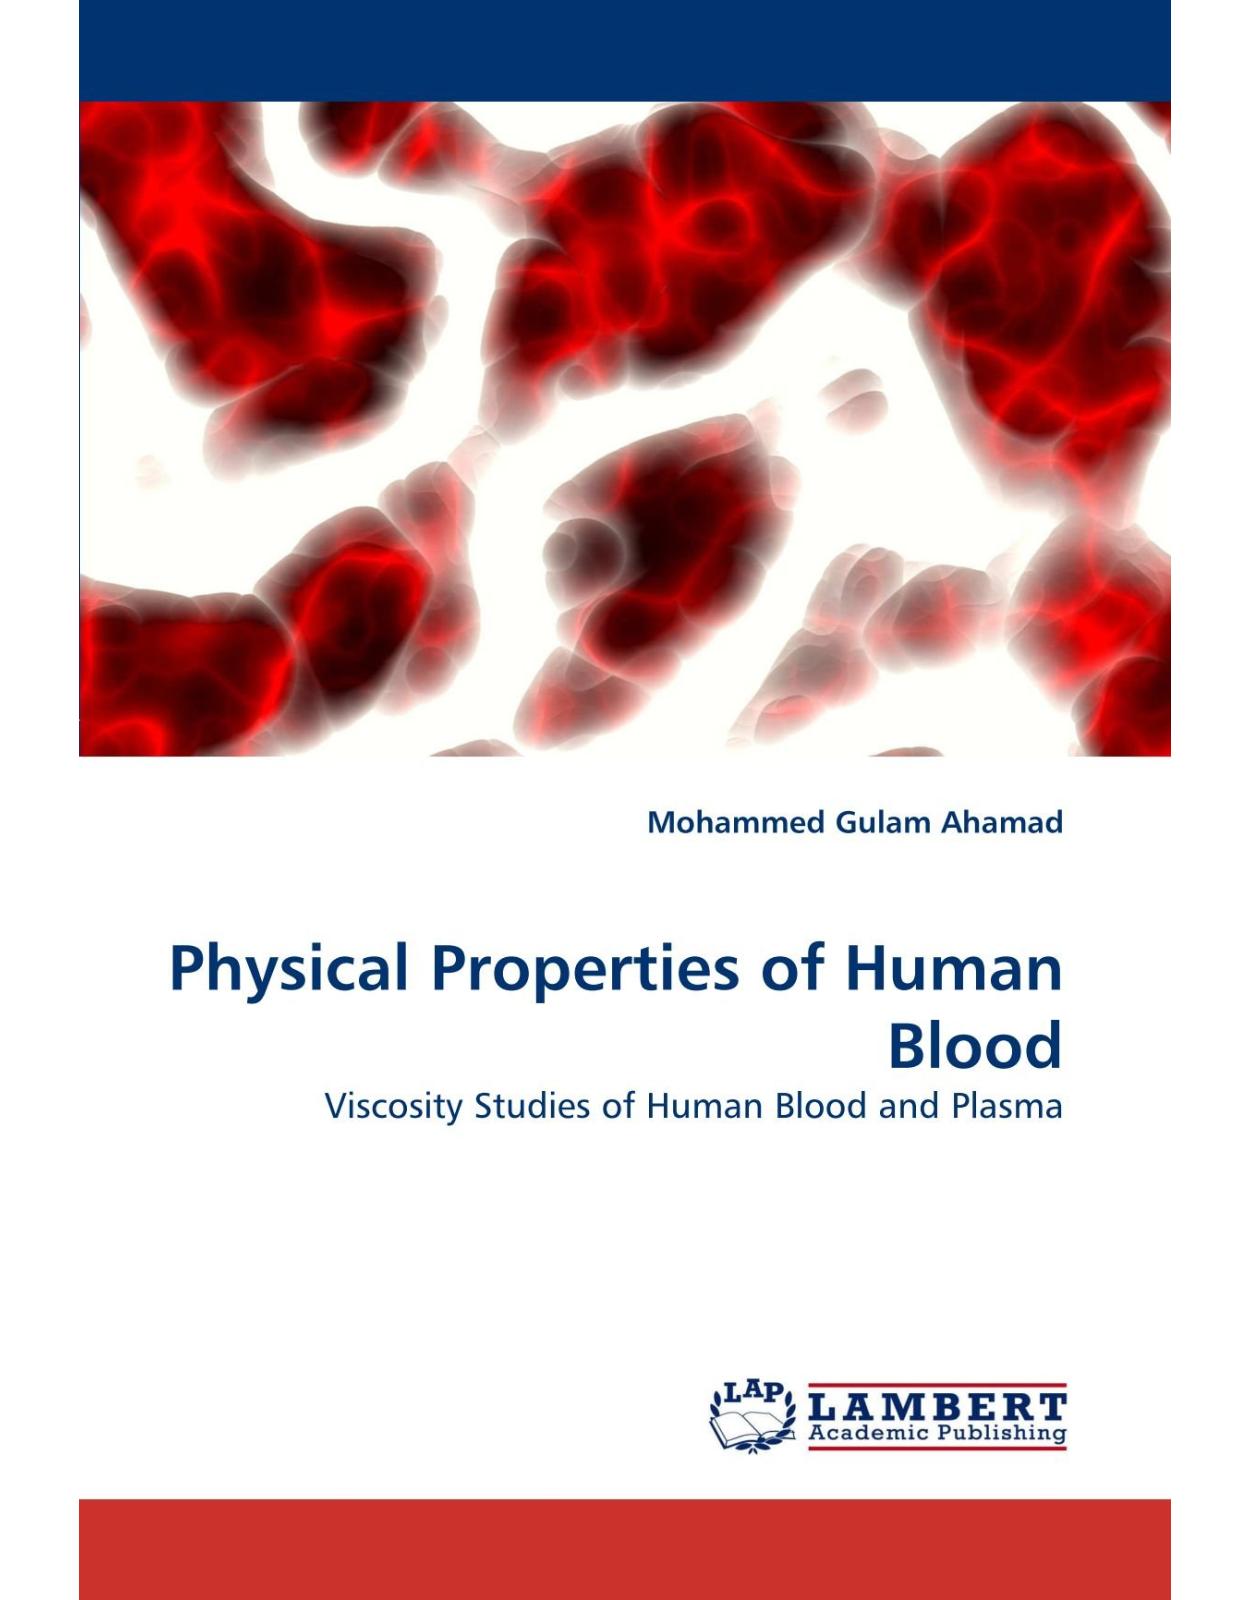 Physical Properties of Human Blood. Viscosity Studies of Human Blood and Plasma